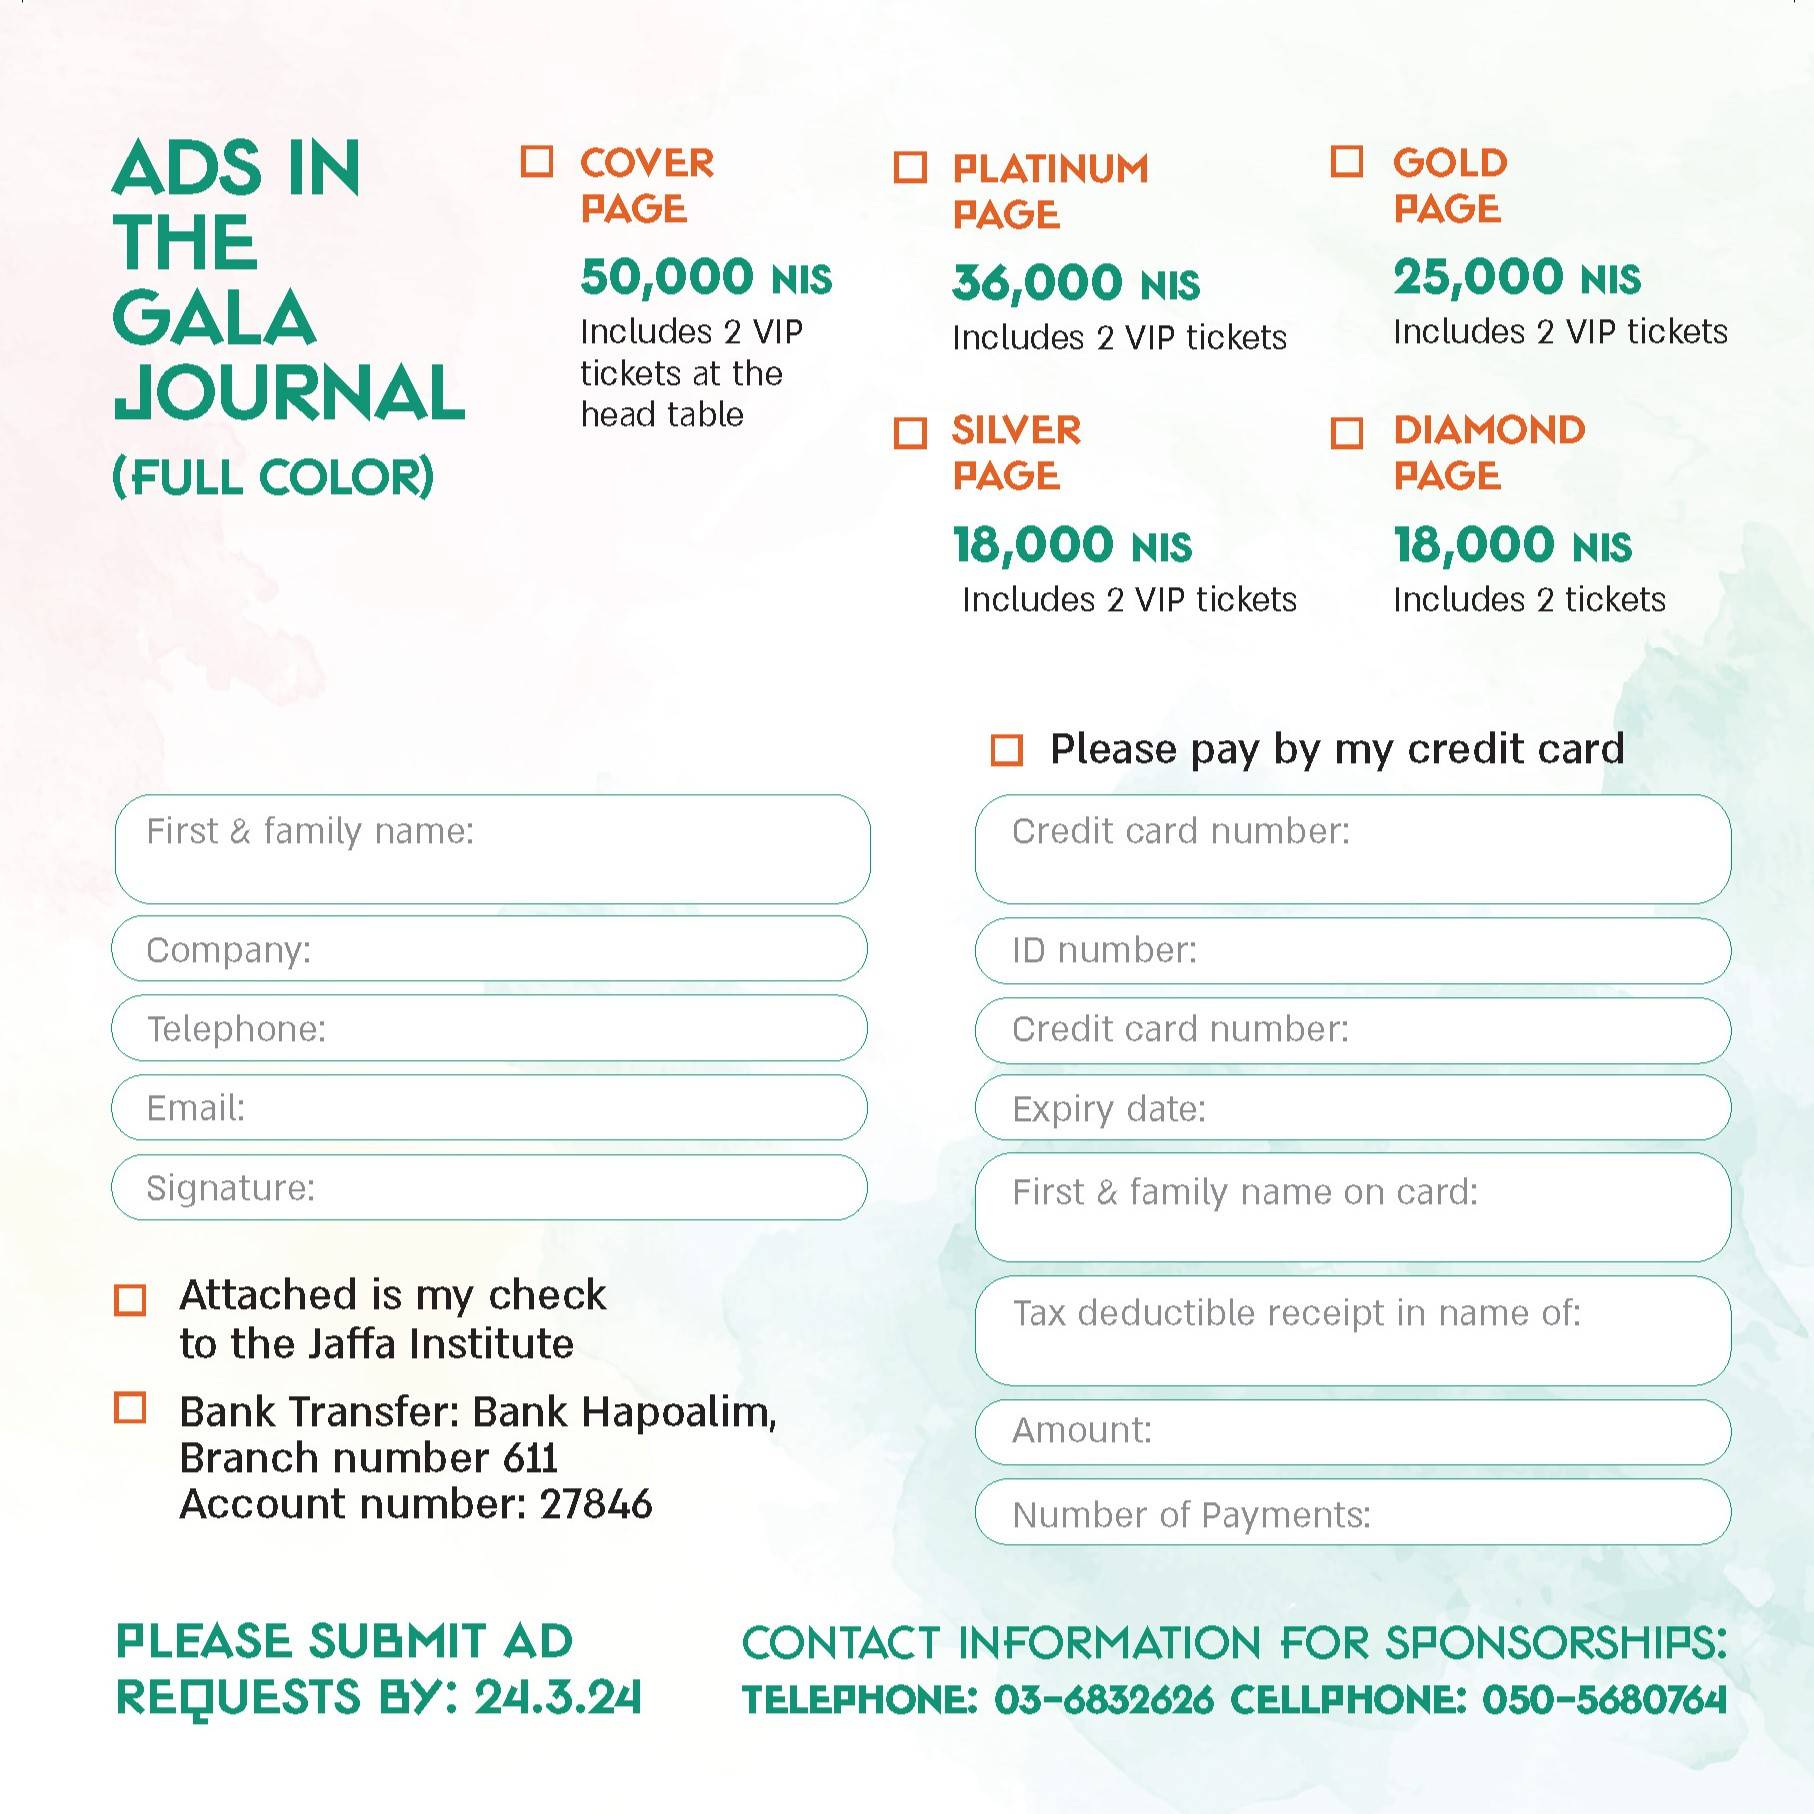 Ads in the Gala Journal Full Color cover page (50,000 NIS) includes 2 VIP tickets at the head table Platinum Page (36,000 NIS) includes two VIP tickets Gold Page (25,000 NIS) includes 2 VIP tickets Silver Page (18000) includes 2 VIP tickets Diamond Page (18,000) NIS includes 2 tickets please submit ad requests by March 24 2024. Contact information telephone 03-683-2626 cellphone: 050-568-0764